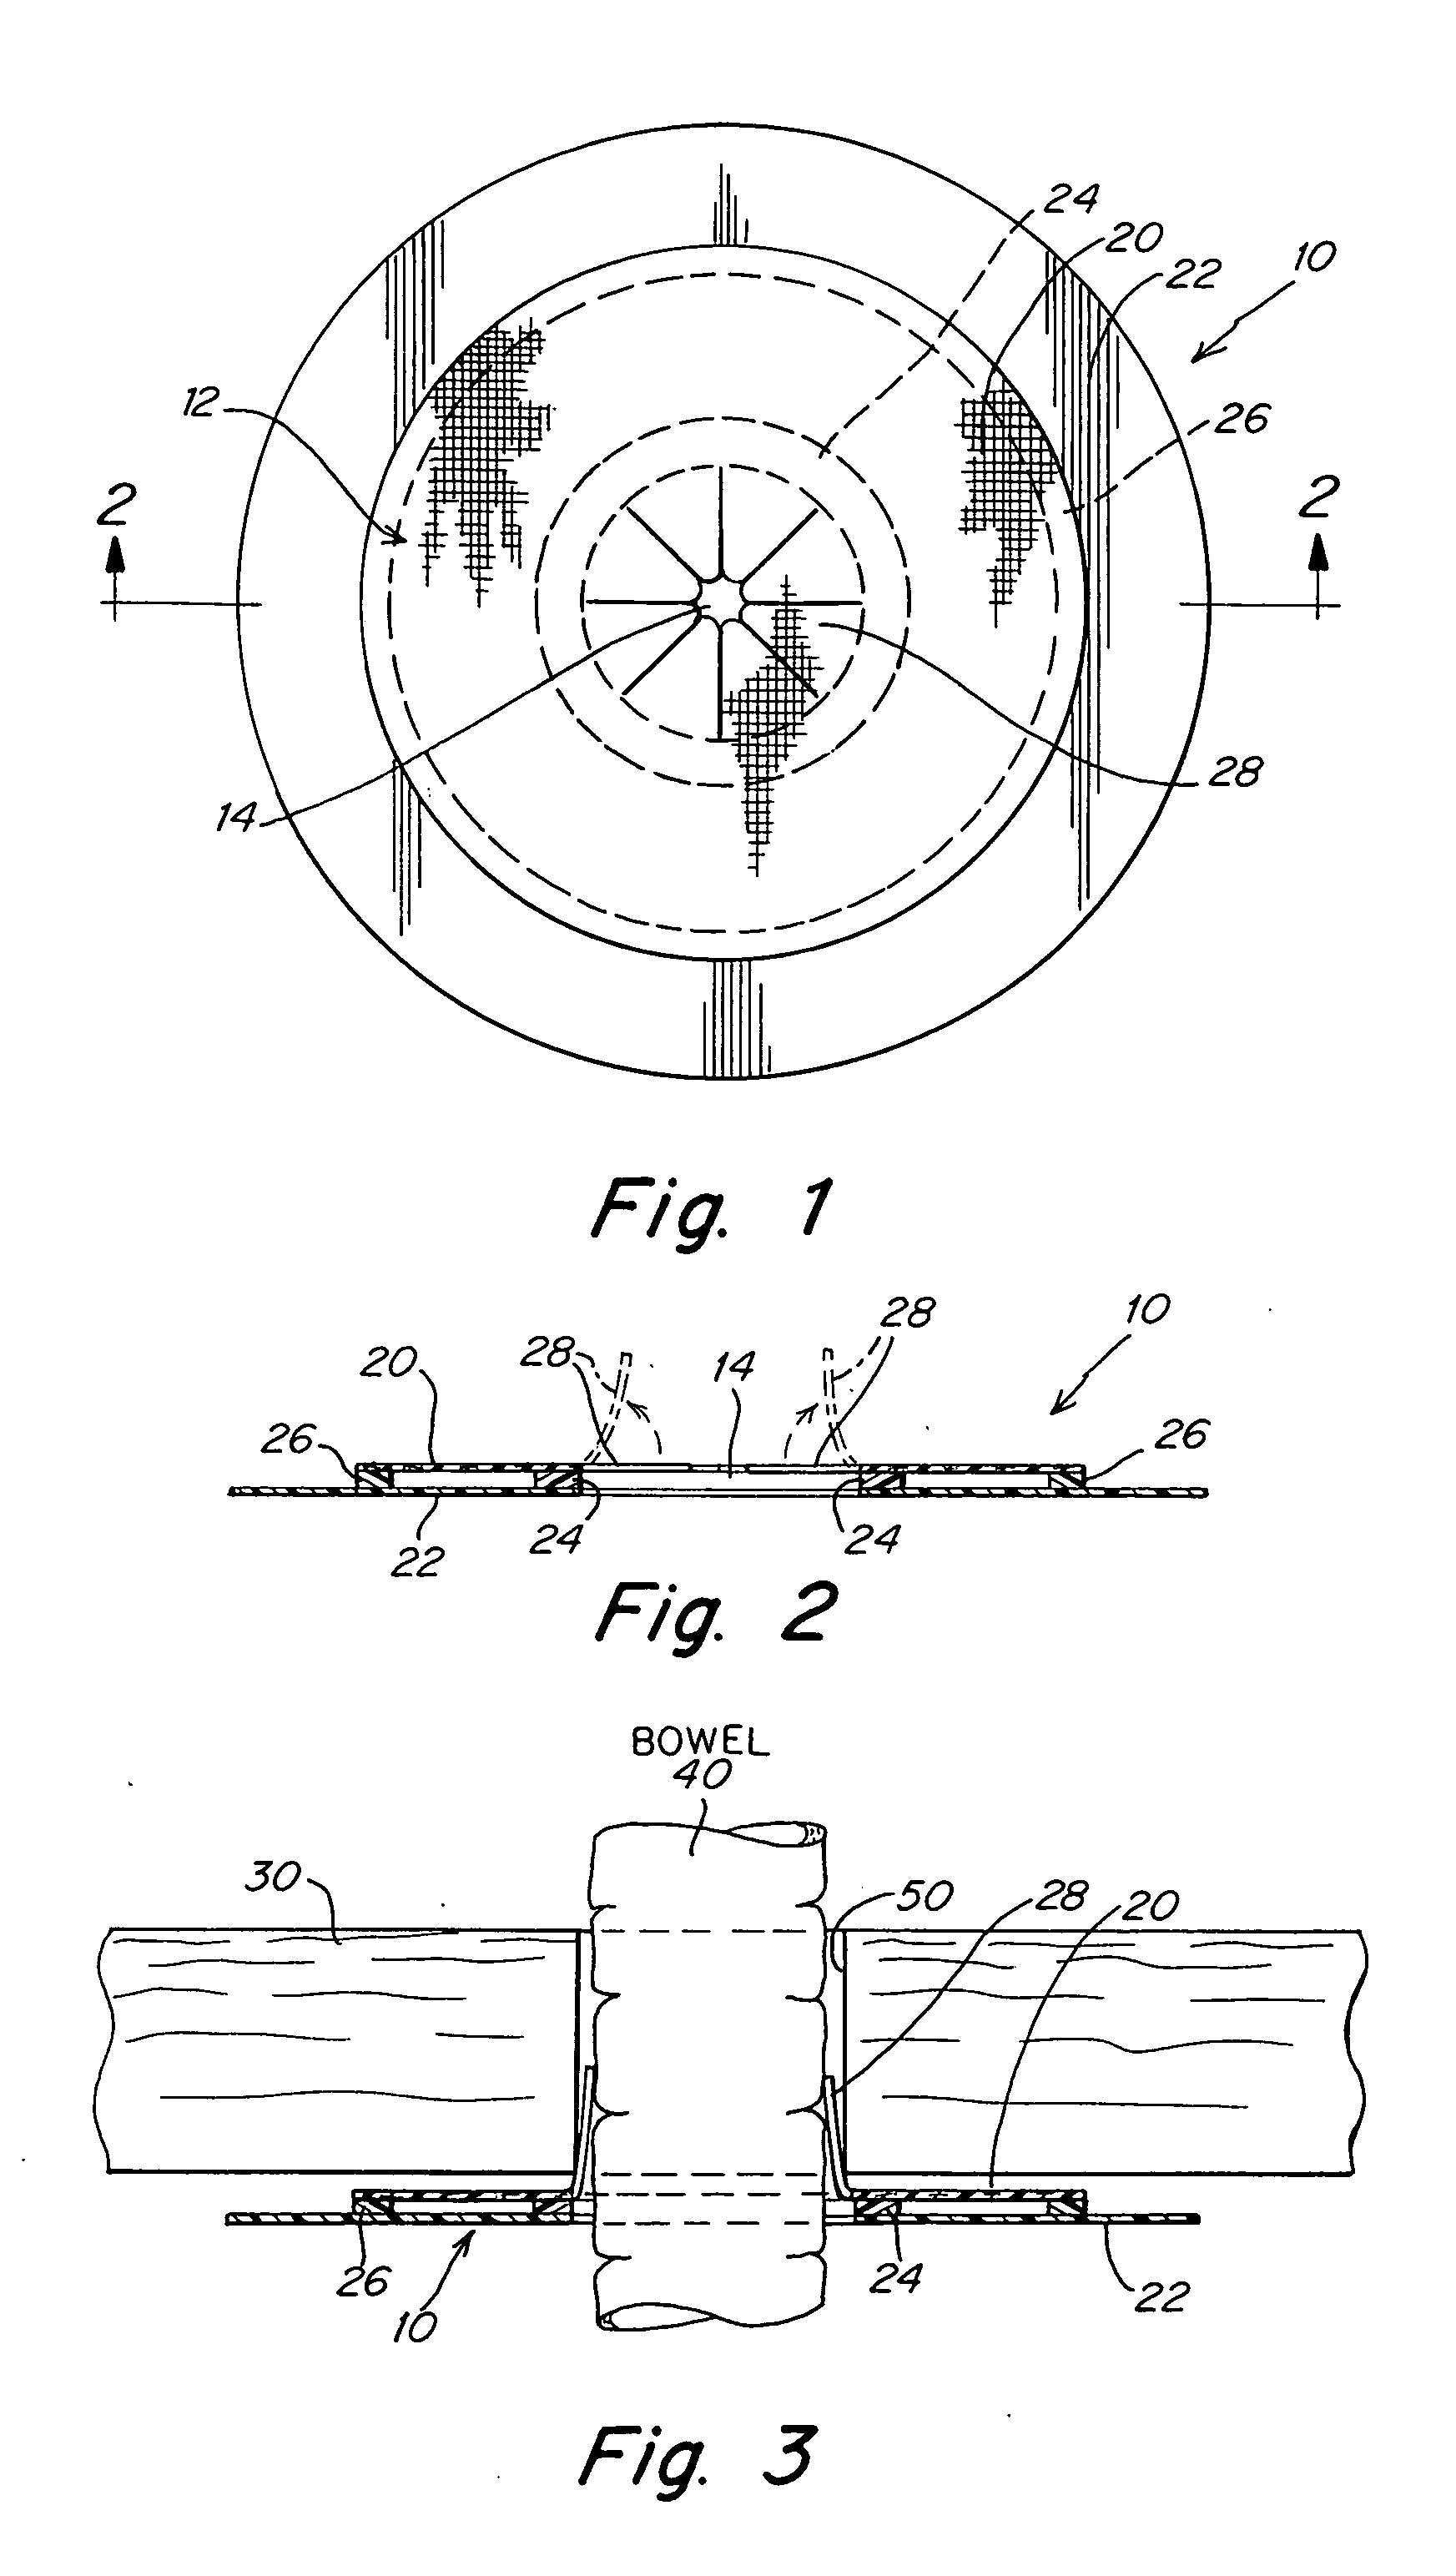 Implantable prosthesis and method of use